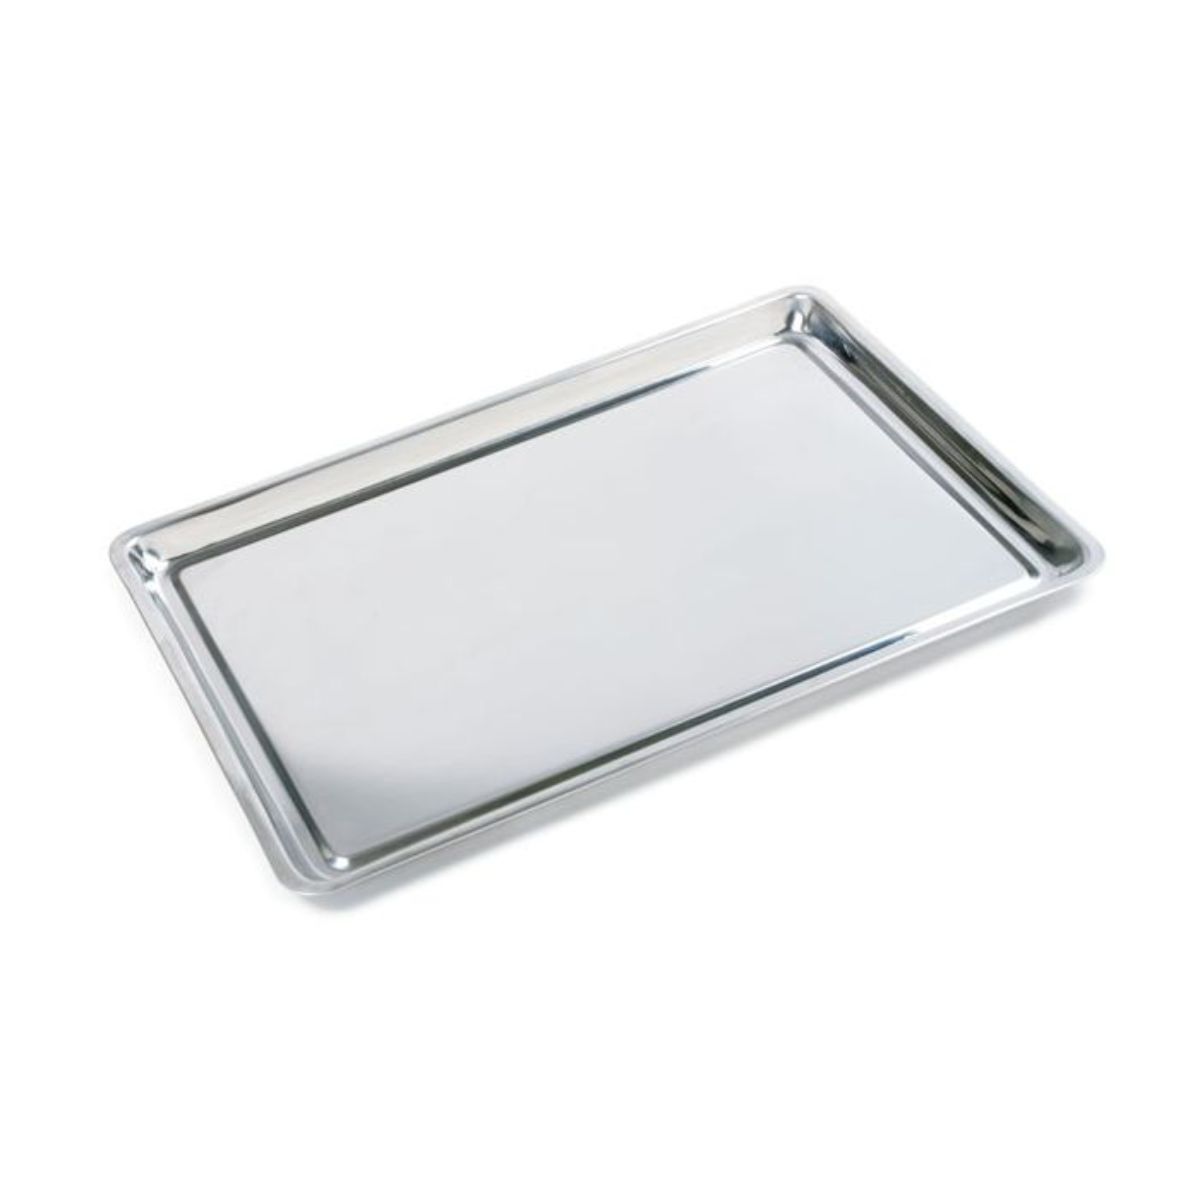 Norpro Stainless Steel Jelly Roll Baking Pan 10"x15"x1/2"